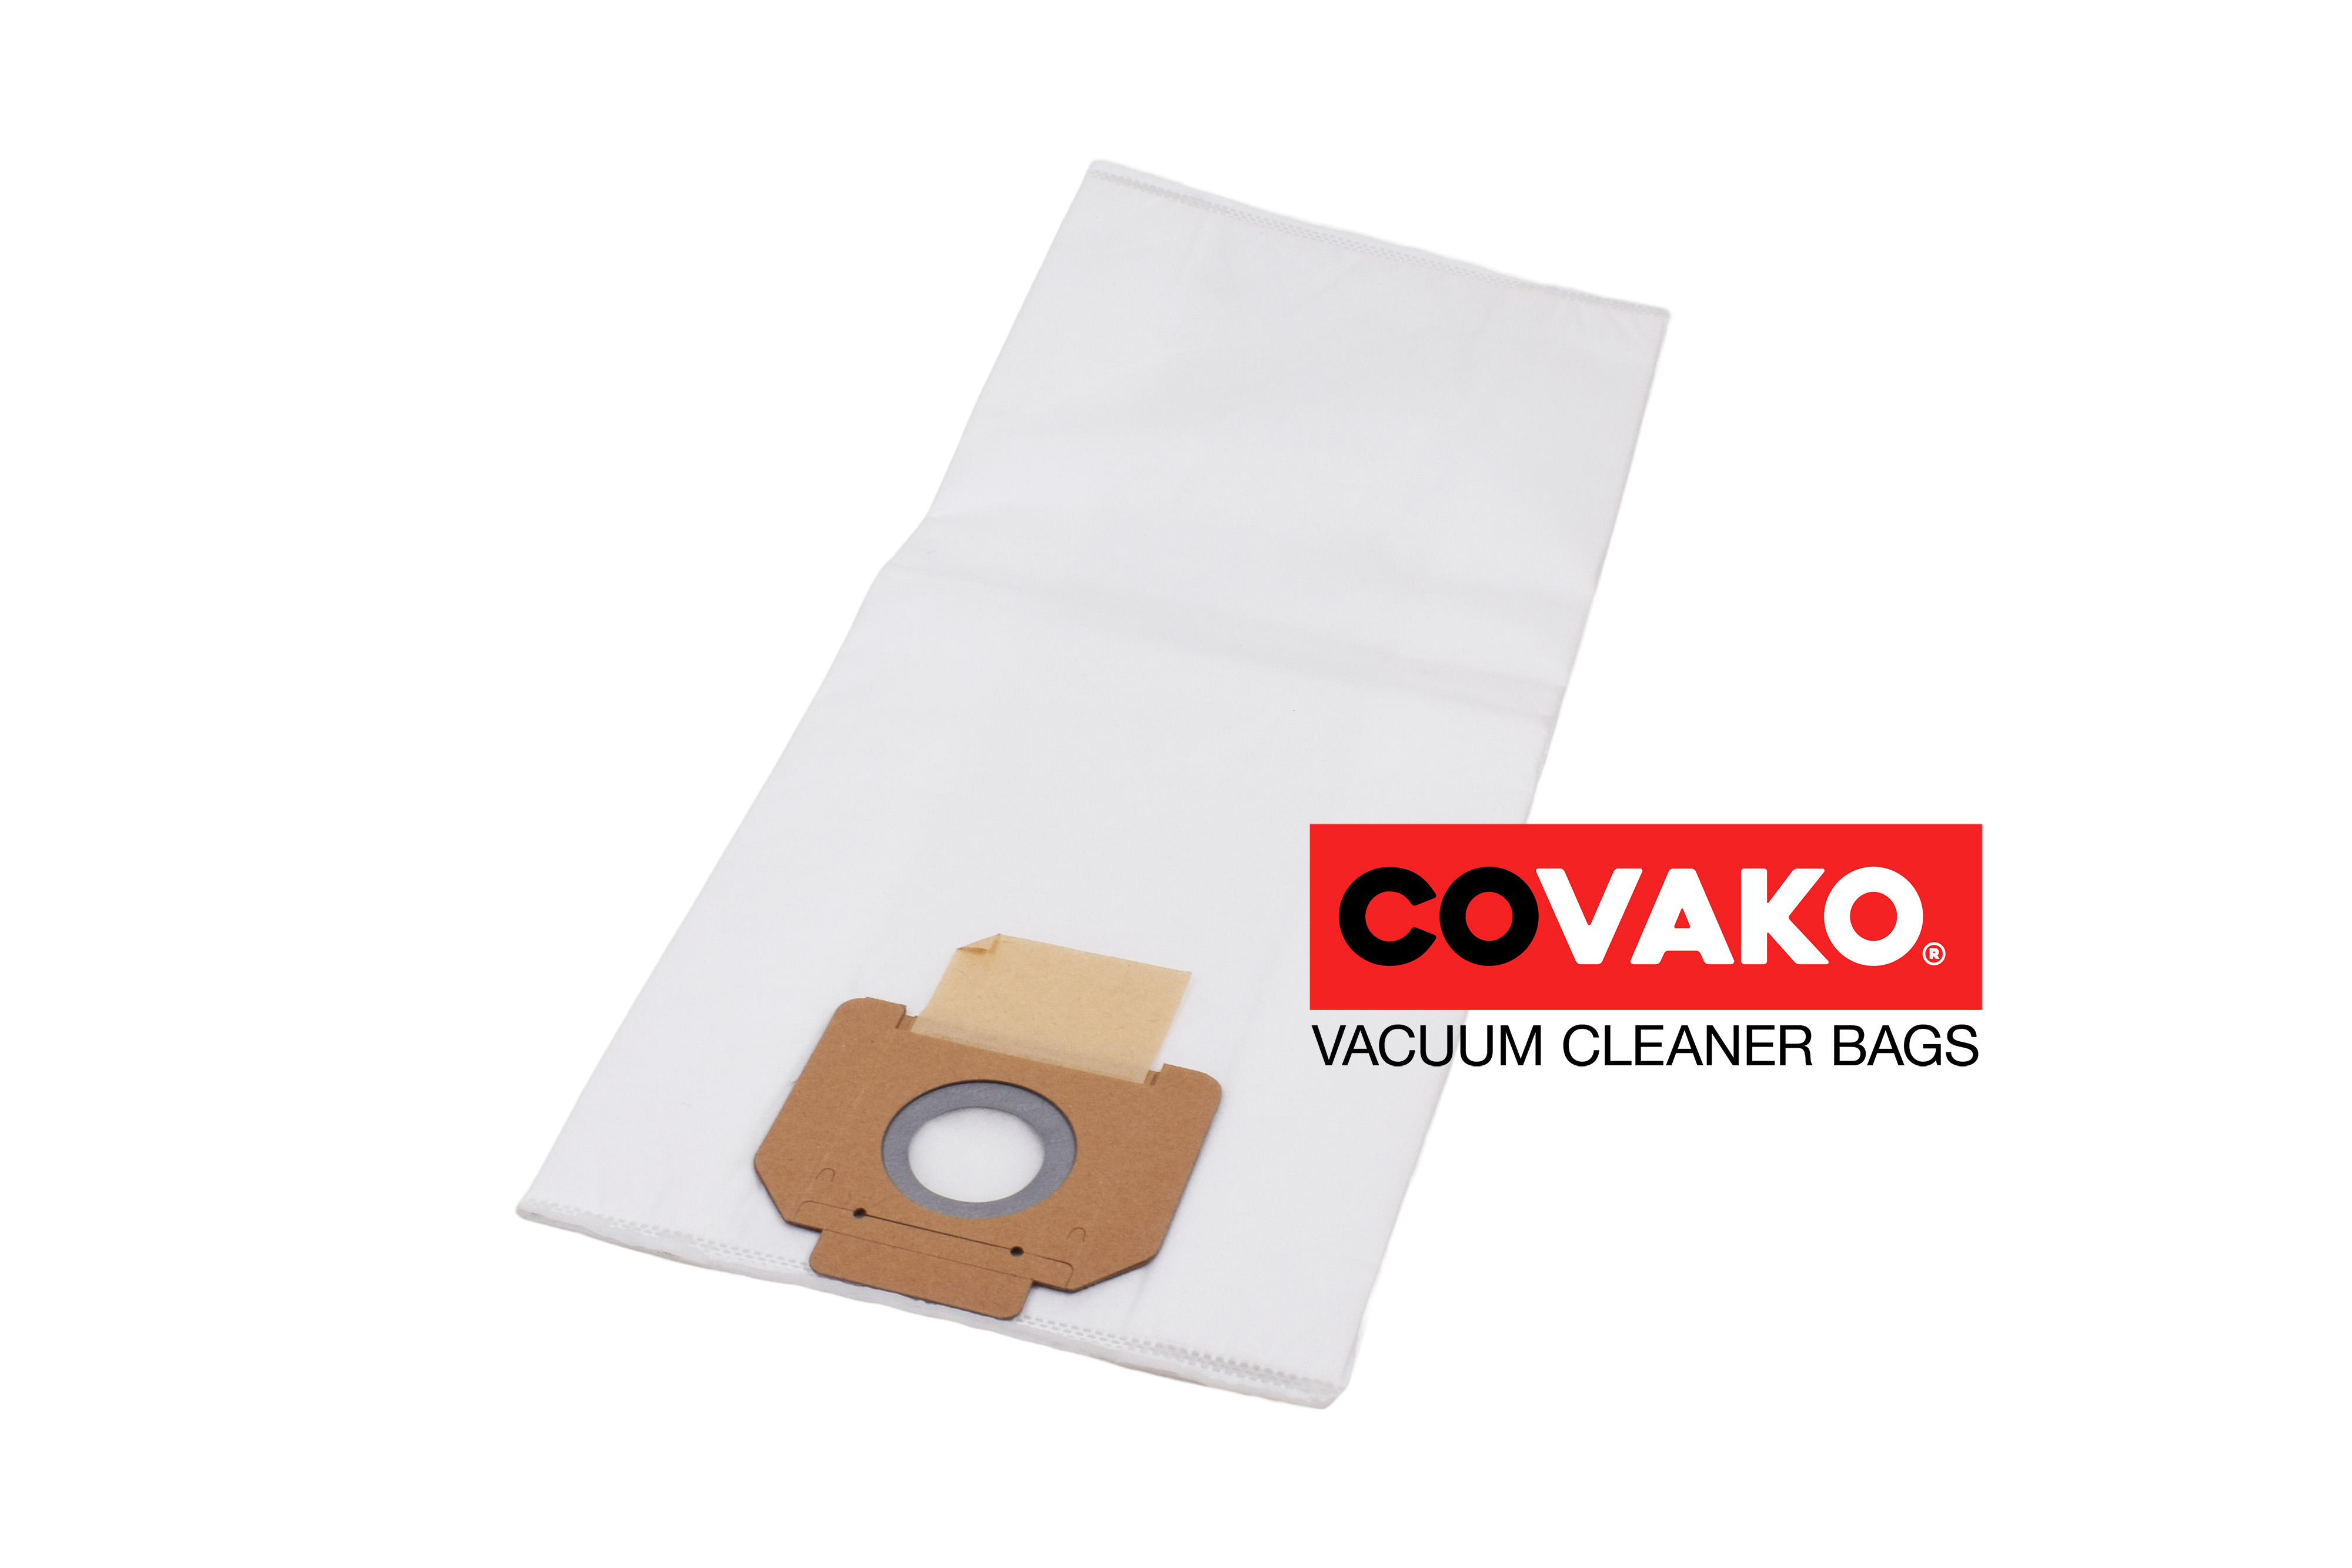 Gansow GC 1/35 W&D / Synthesis - Gansow vacuum cleaner bags